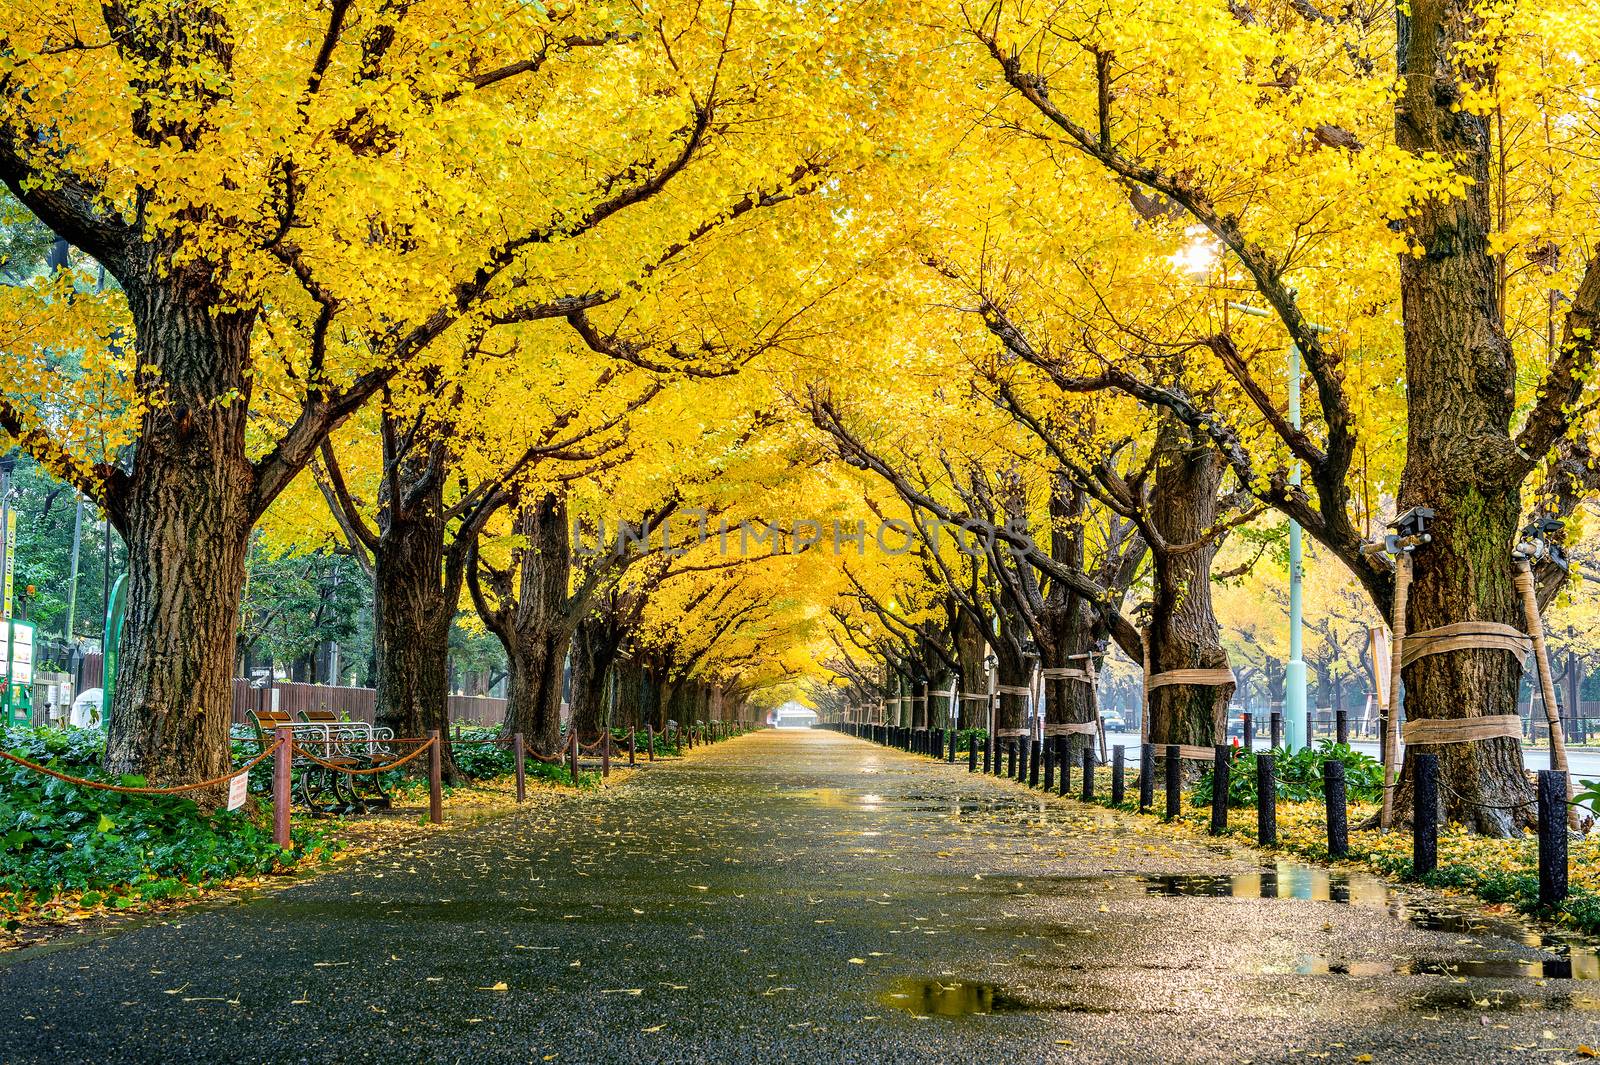 Row of yellow ginkgo tree in autumn. Autumn park in Tokyo, Japan by gutarphotoghaphy